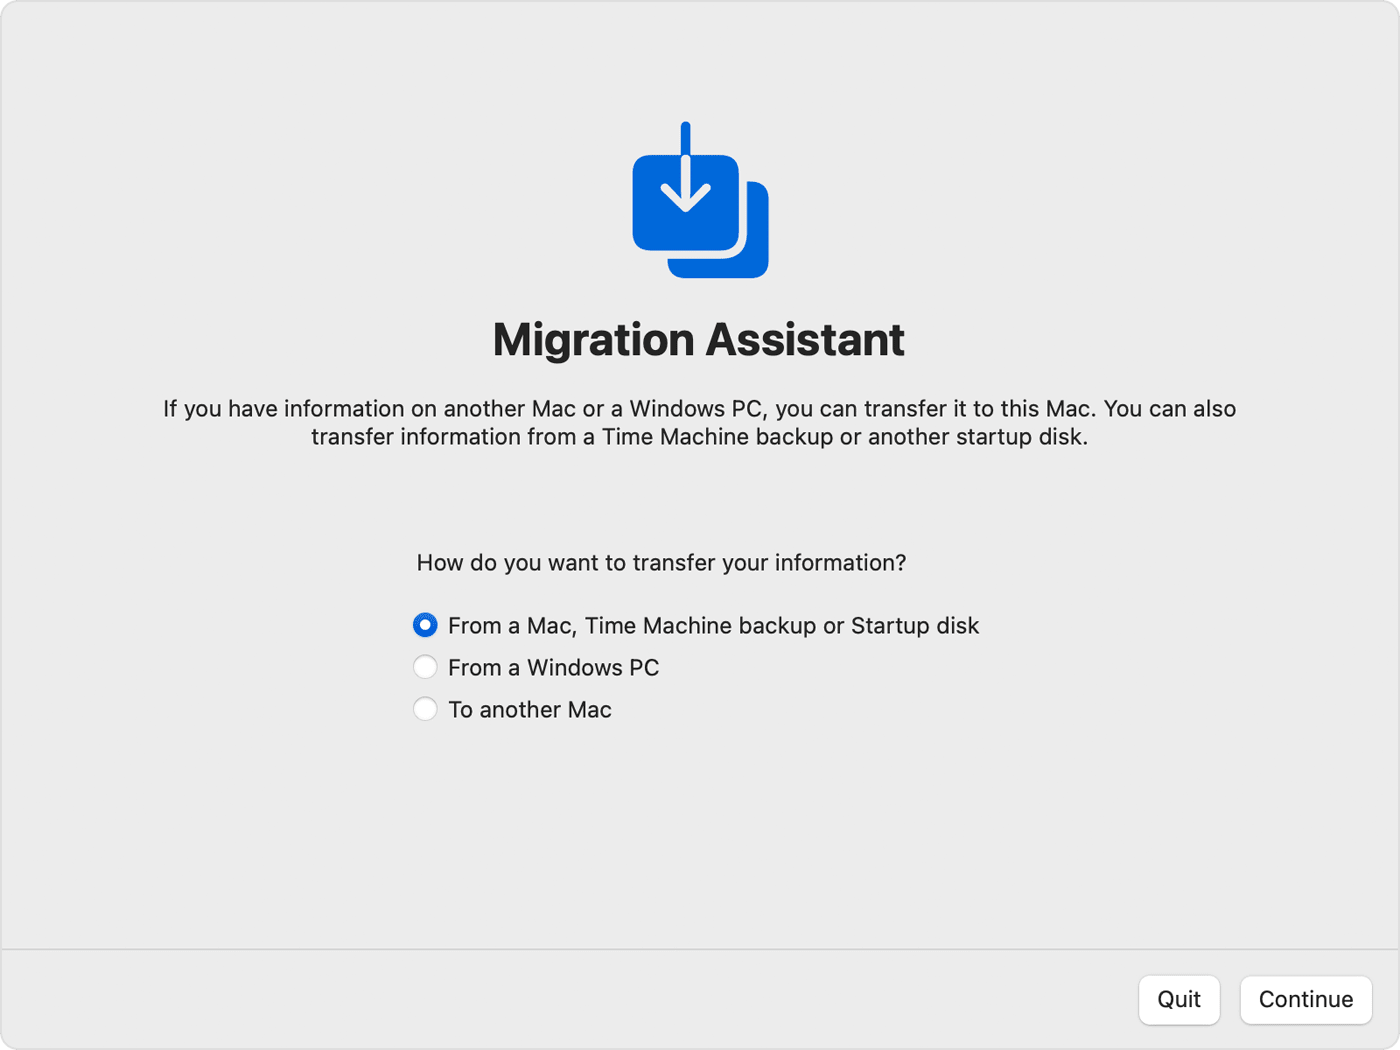 Migration Assistant: how do you want to transfer your information?